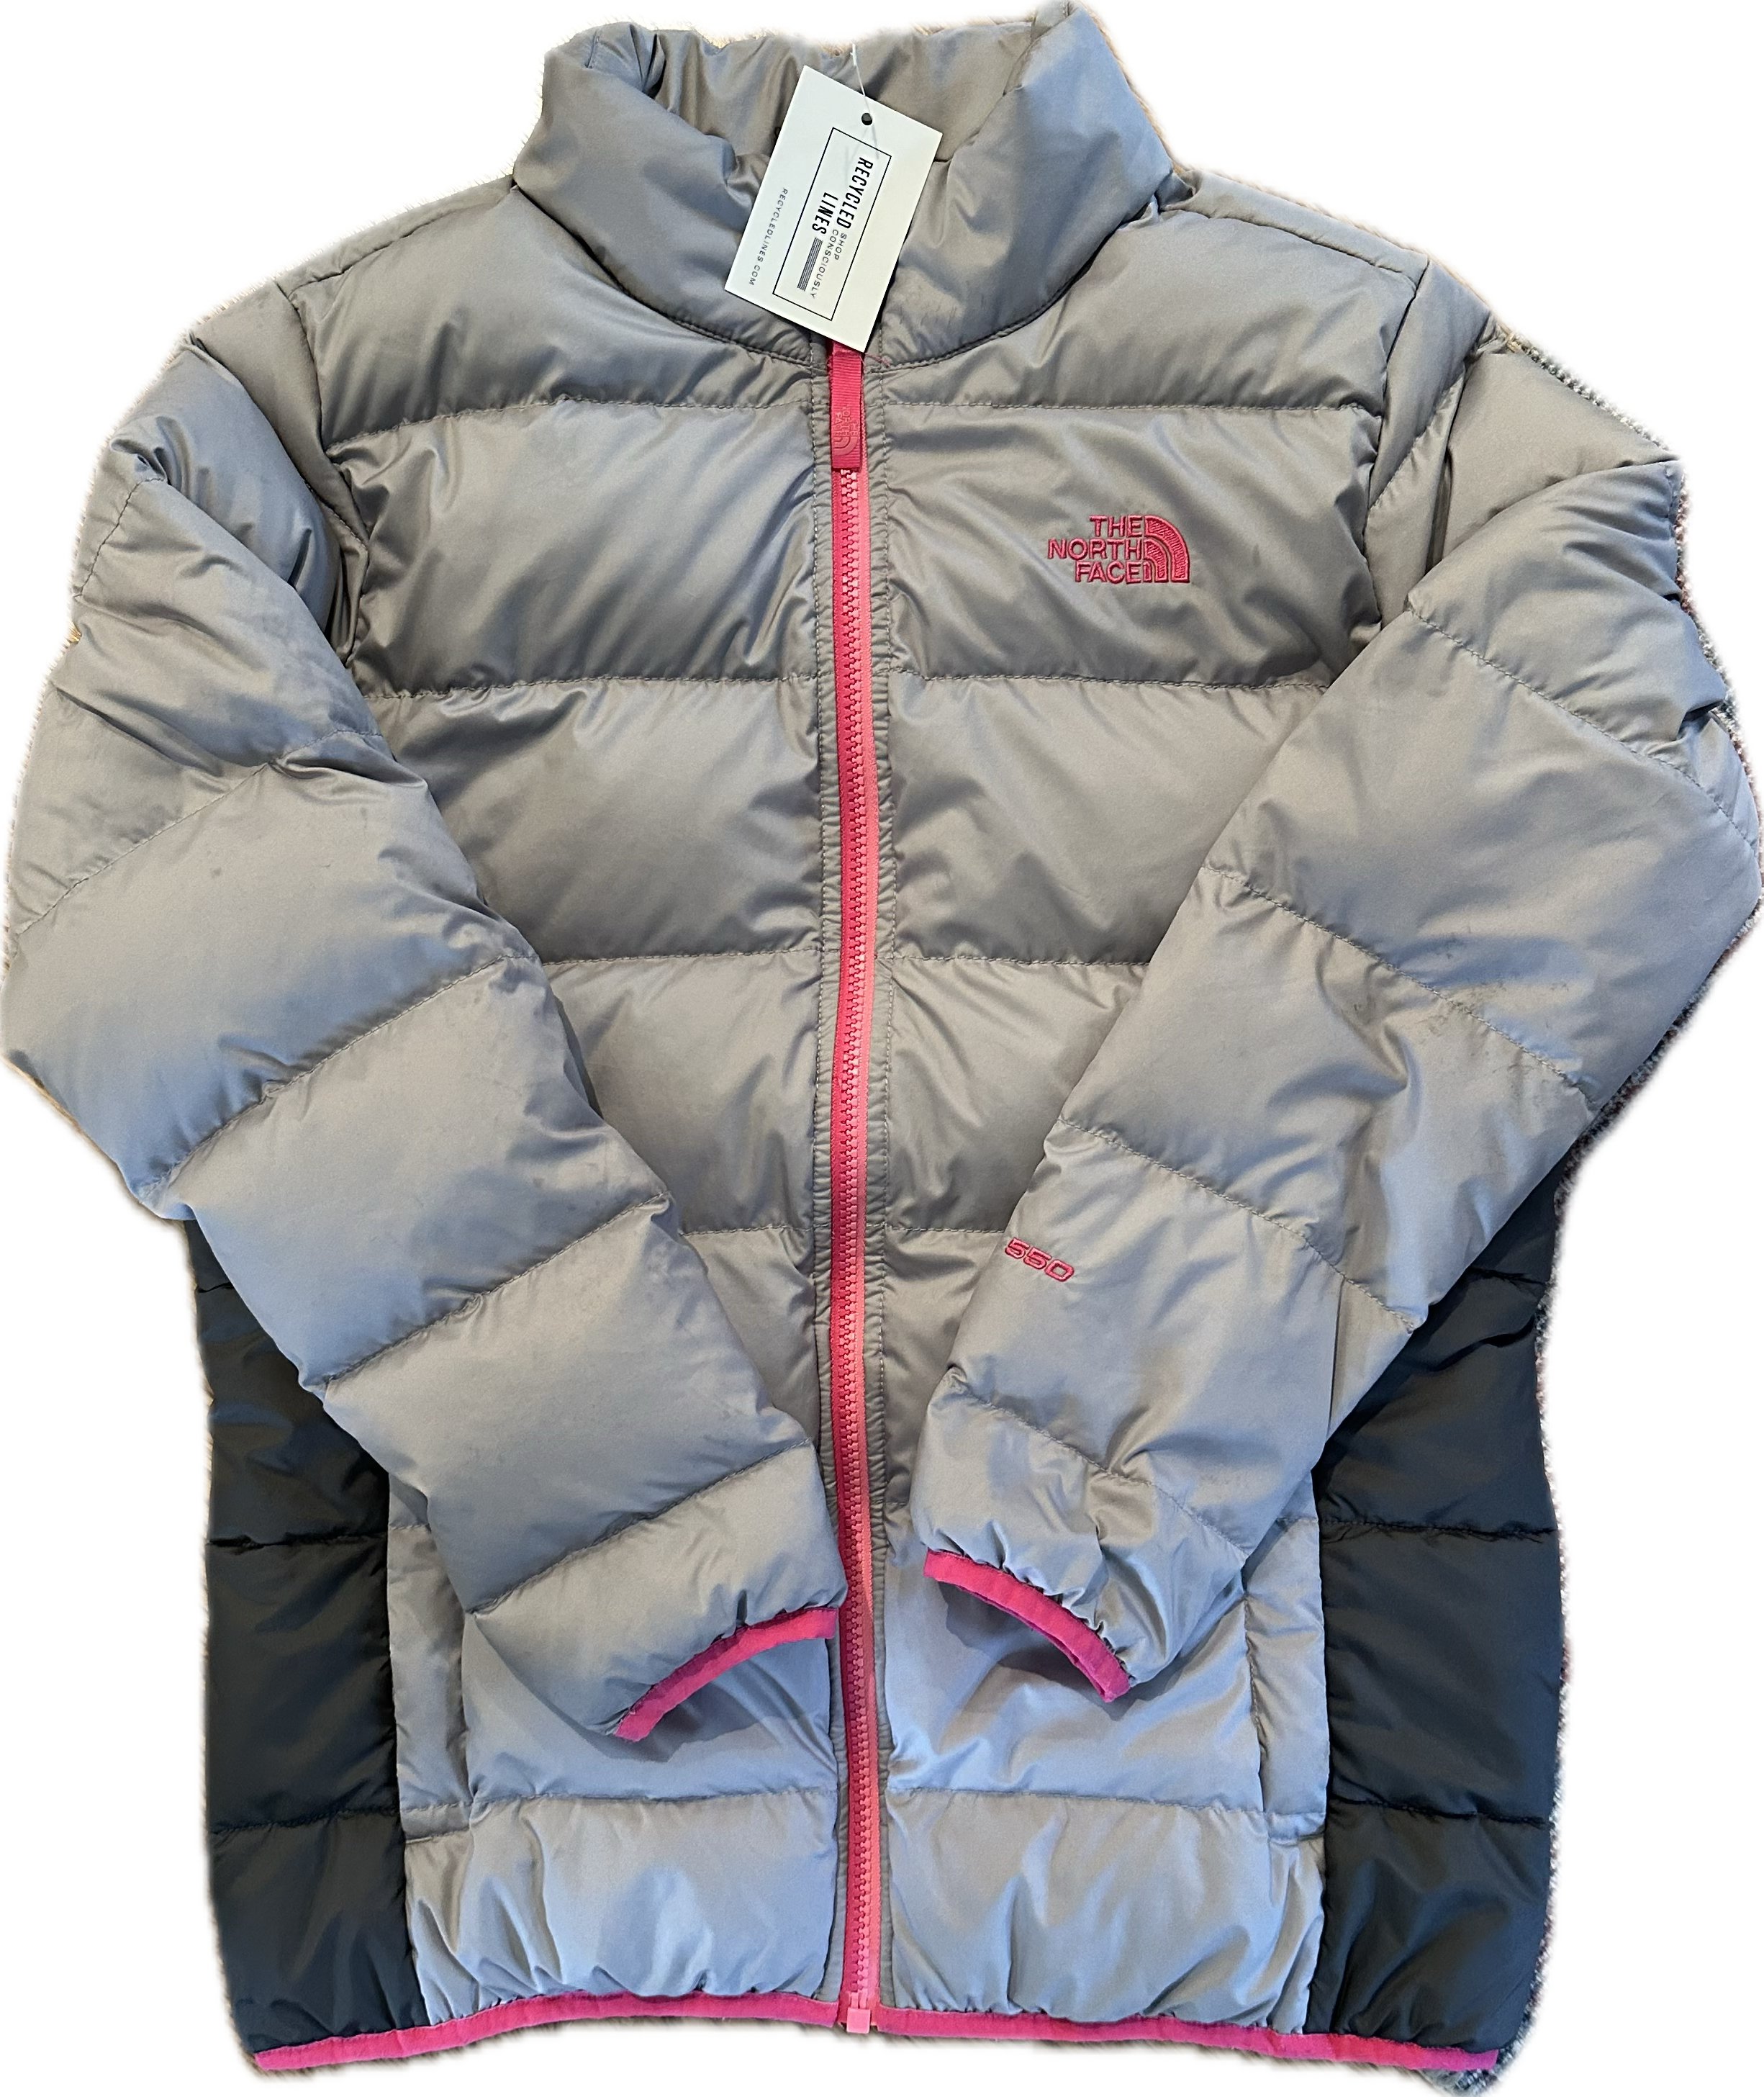 North Face Down Jacket, Grey/Pink Girls Size XL (18)